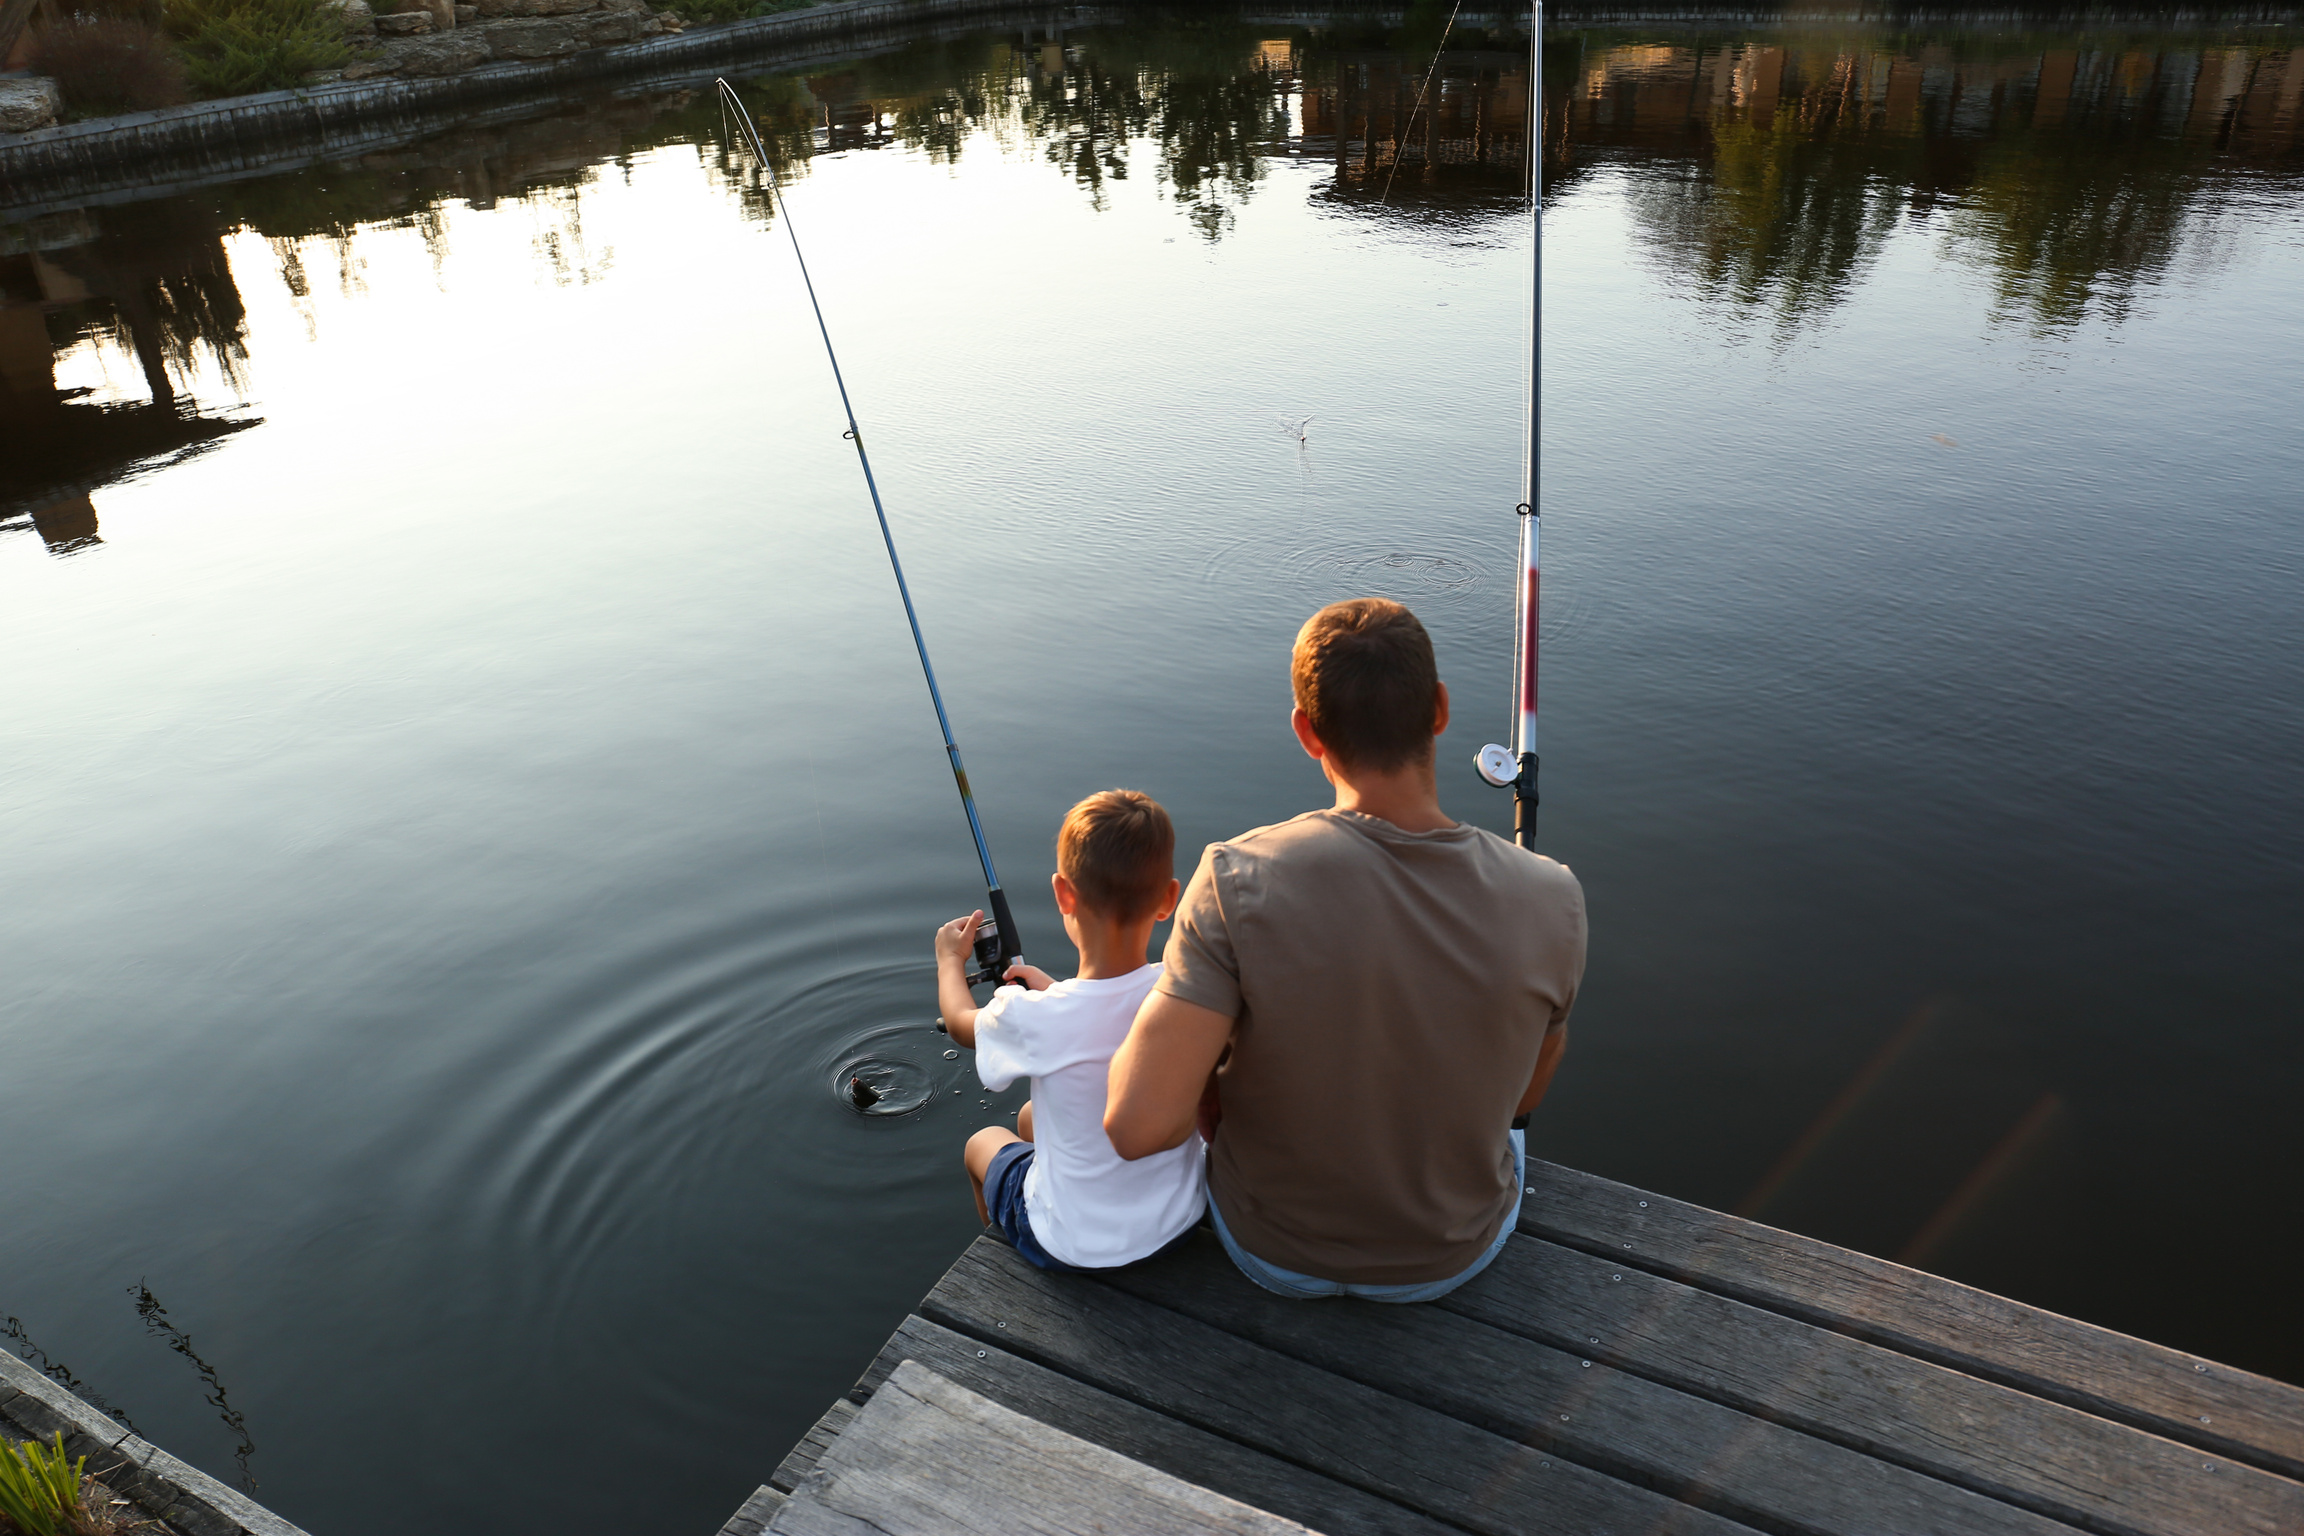 Dad and Son Fishing Together on Sunny Day